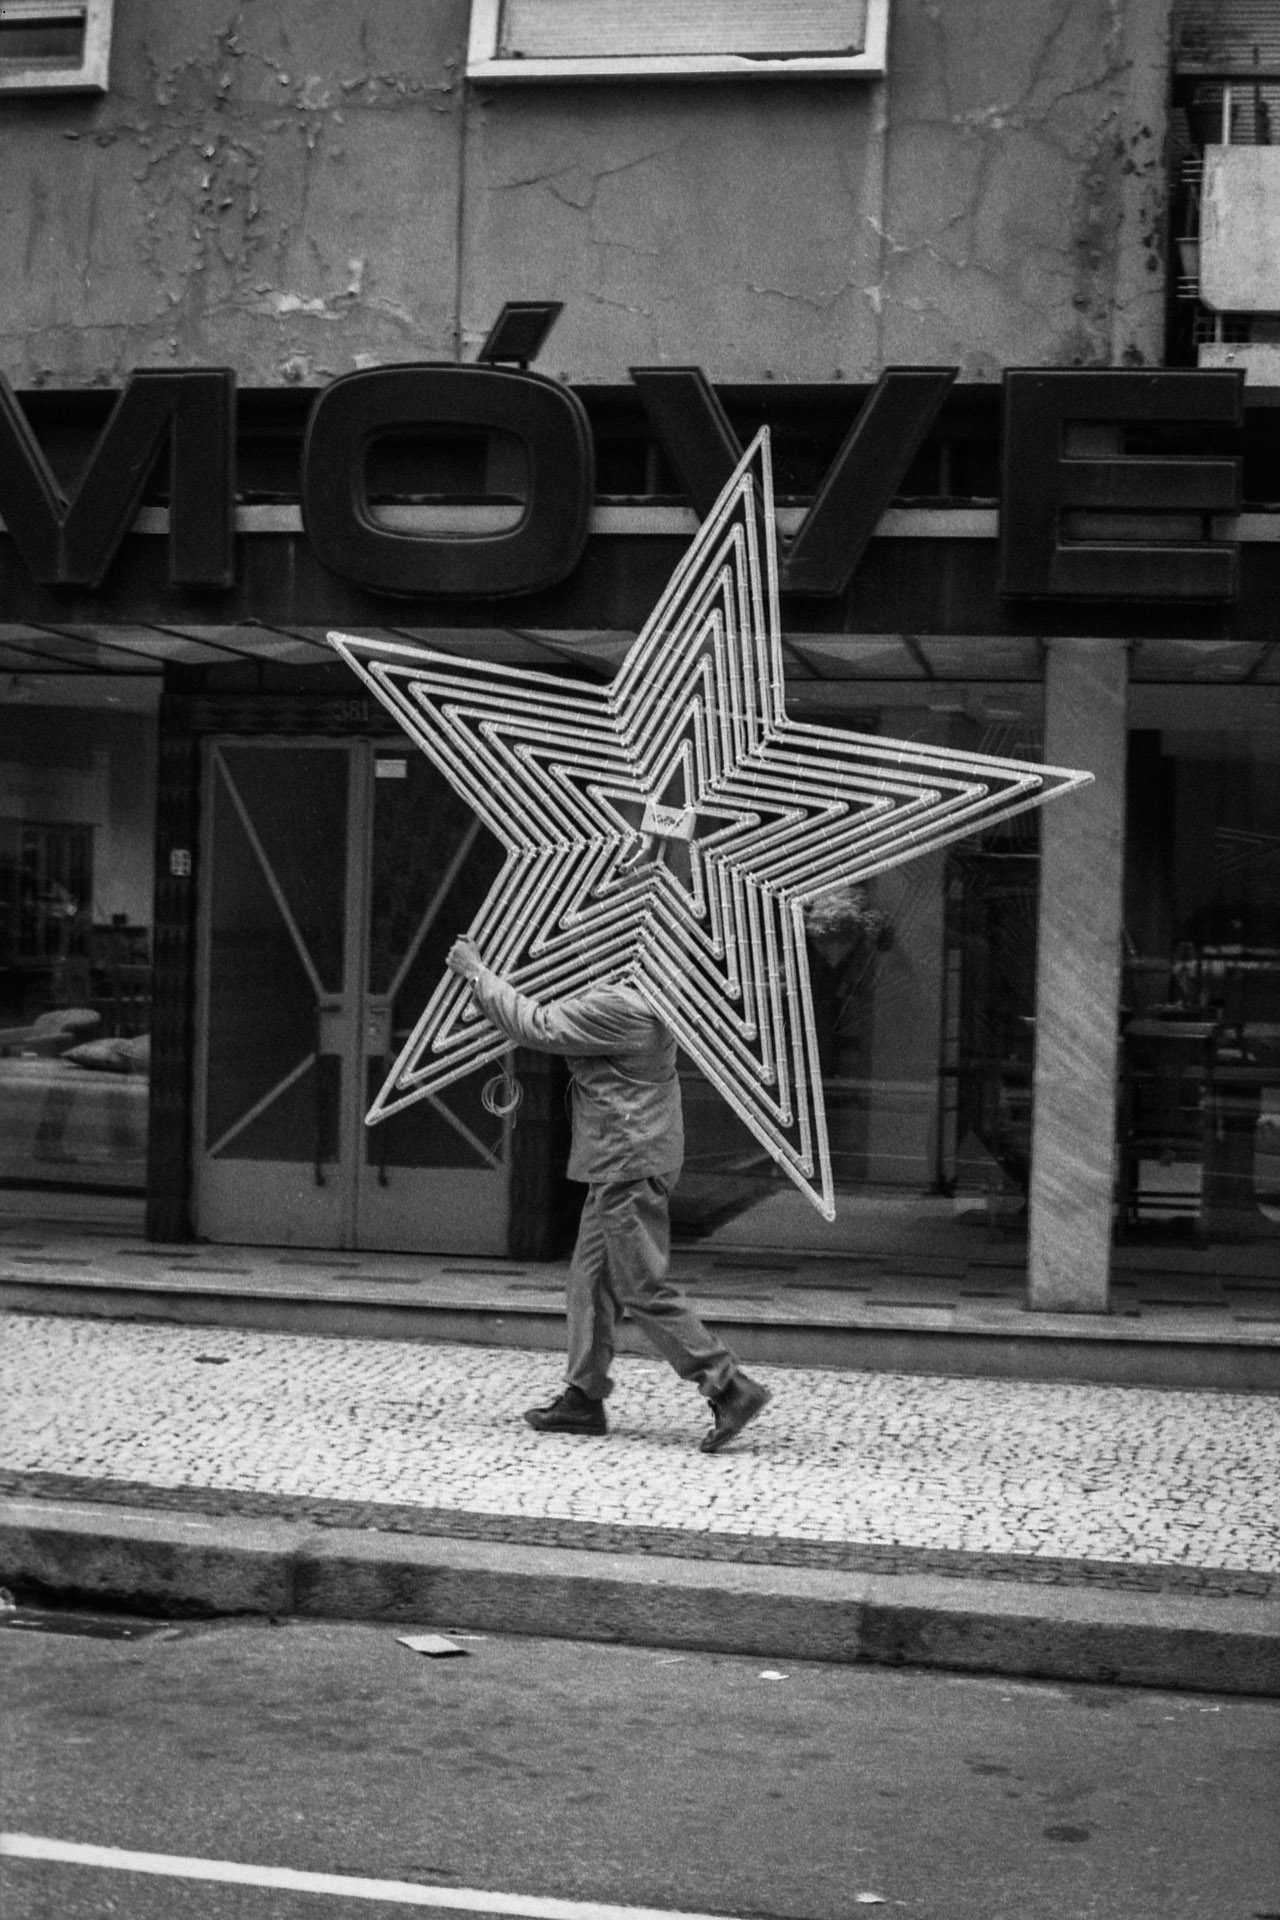 A man carrying a star in the street.